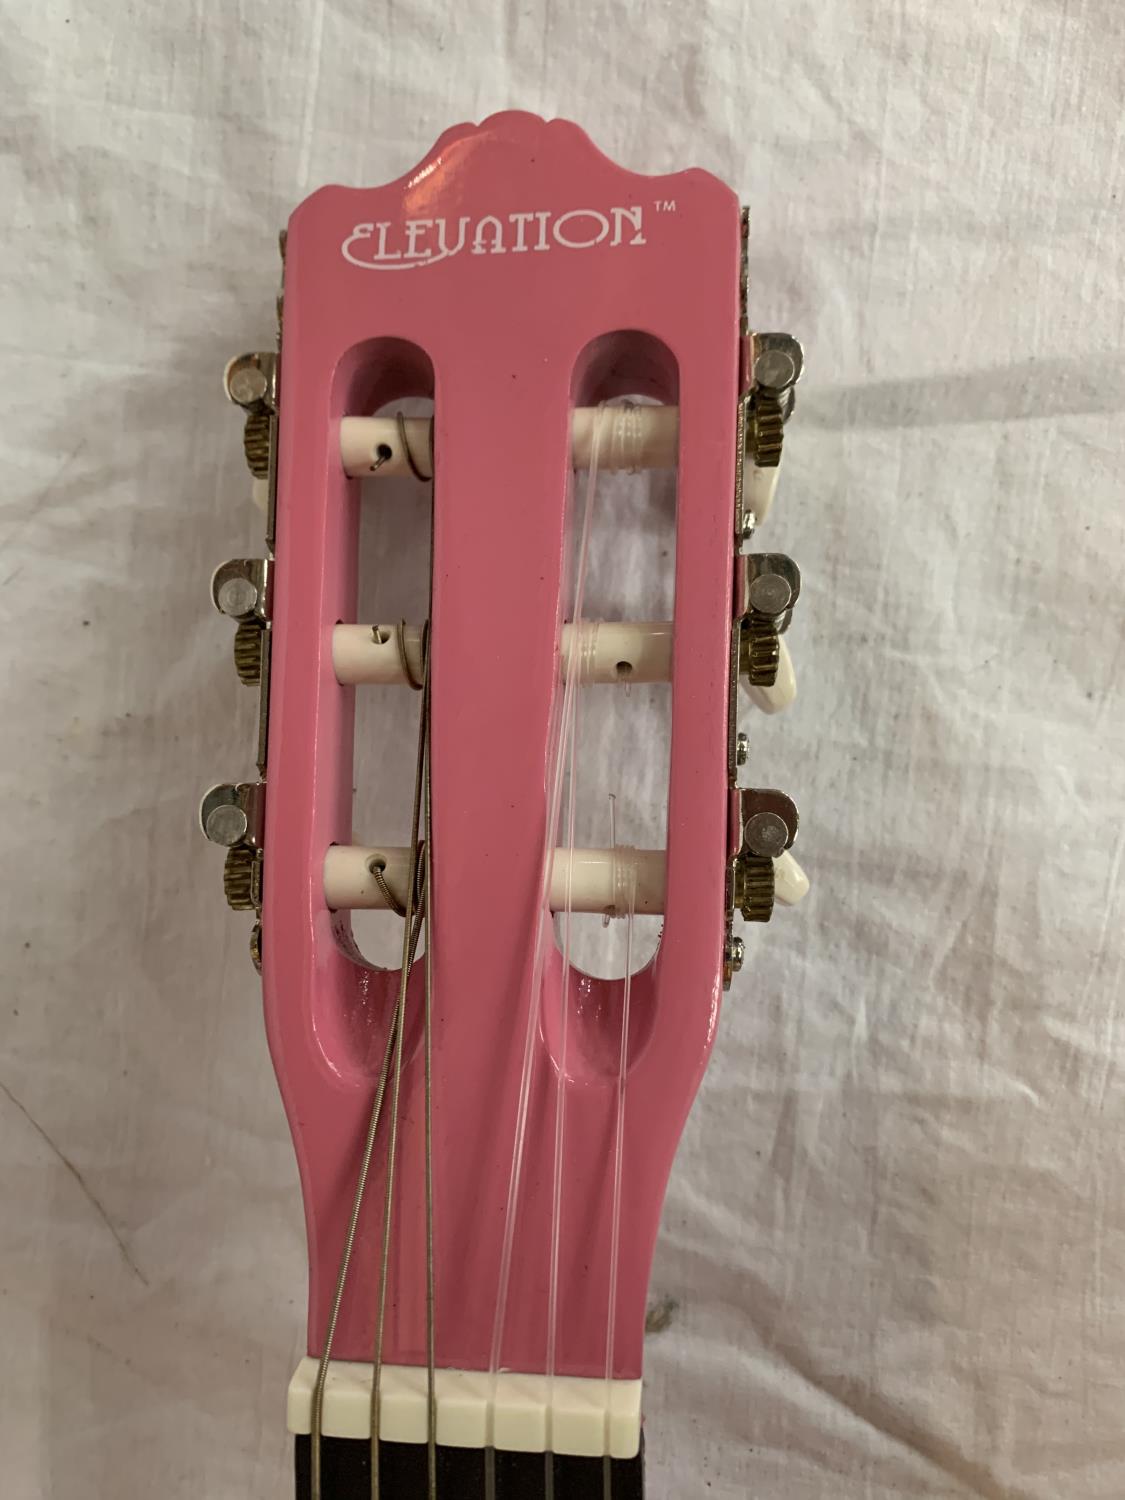 A NEW AND BOXED PINK ELEVATION 36 INCH CLASSIC GUITAR - Image 3 of 4